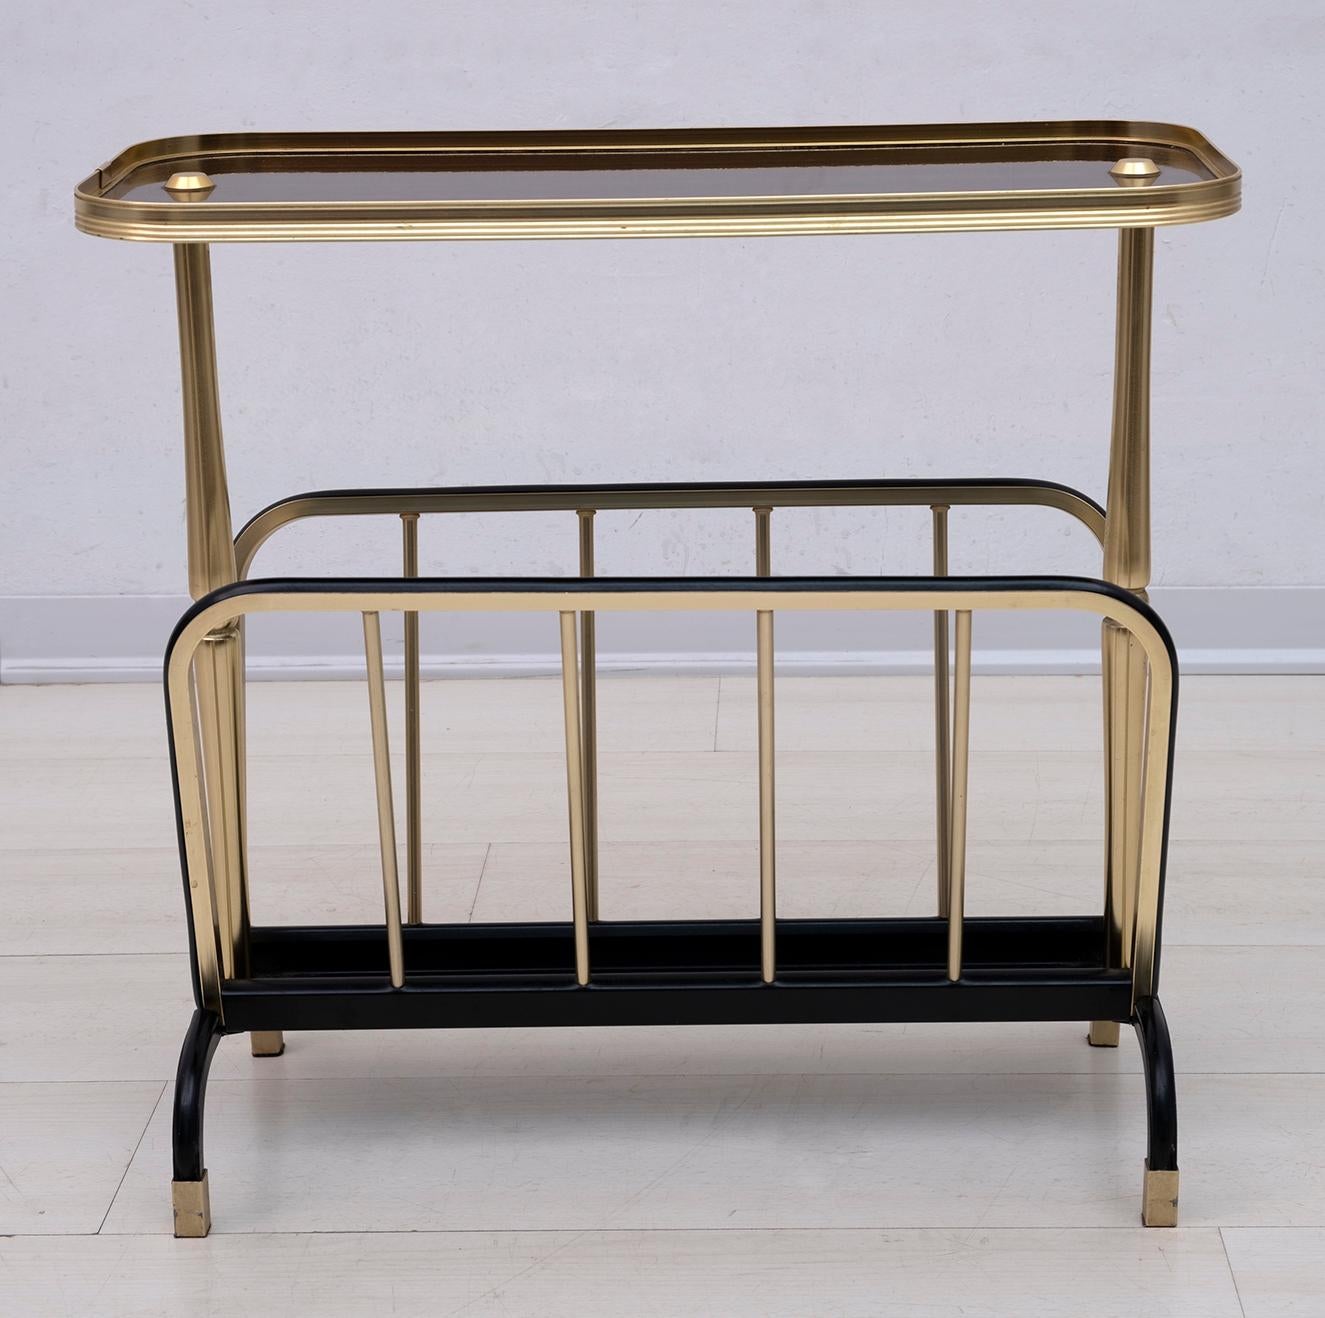 Beautiful magazine racks in brass and wood, Italian manufacture from the 1970s.